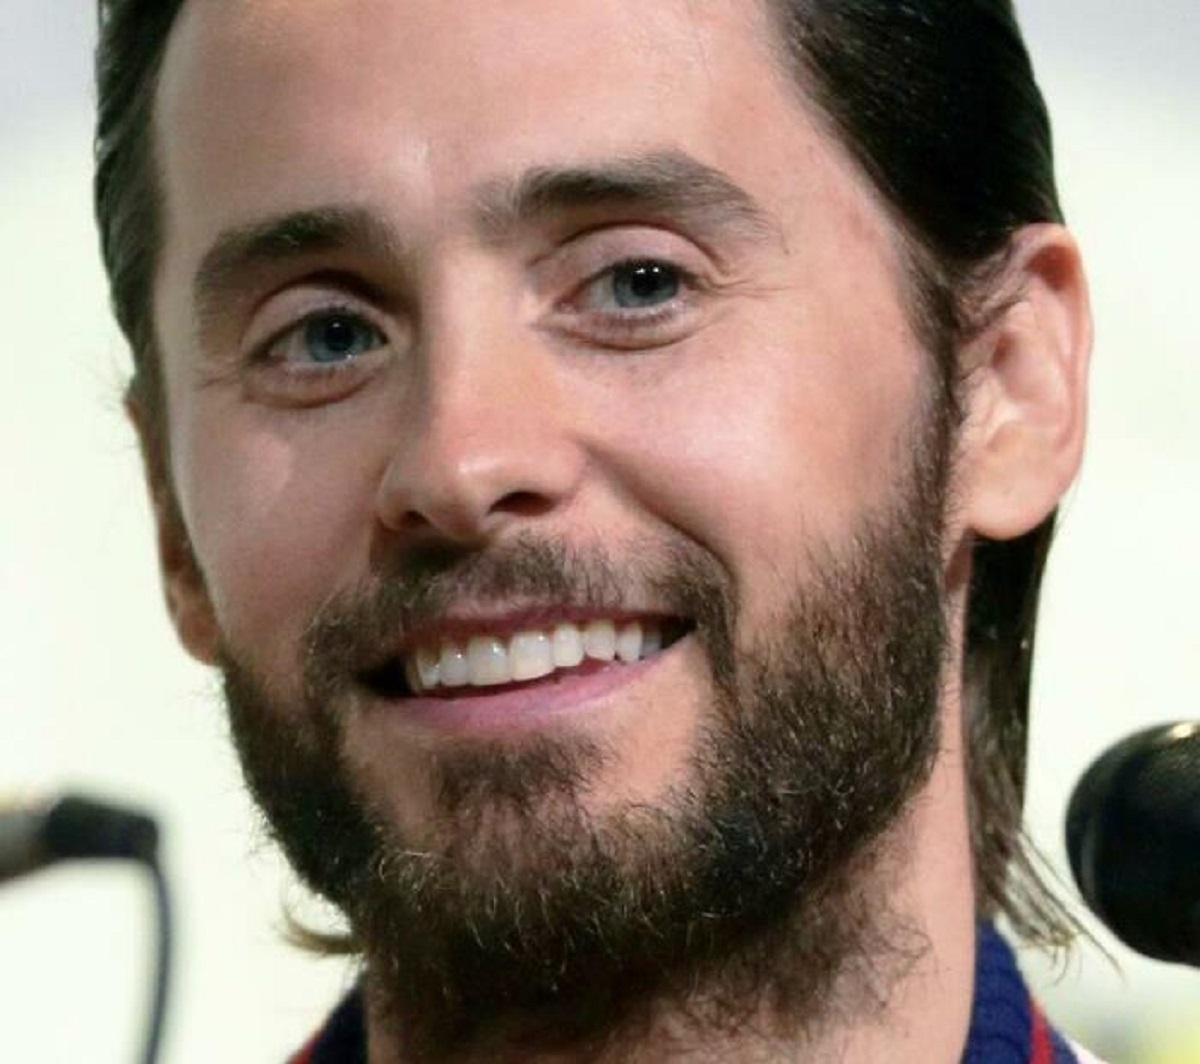 Jared Leto.

For someone who does a month long spirit journey in the wilderness each year, he's a huge piece of s**t.